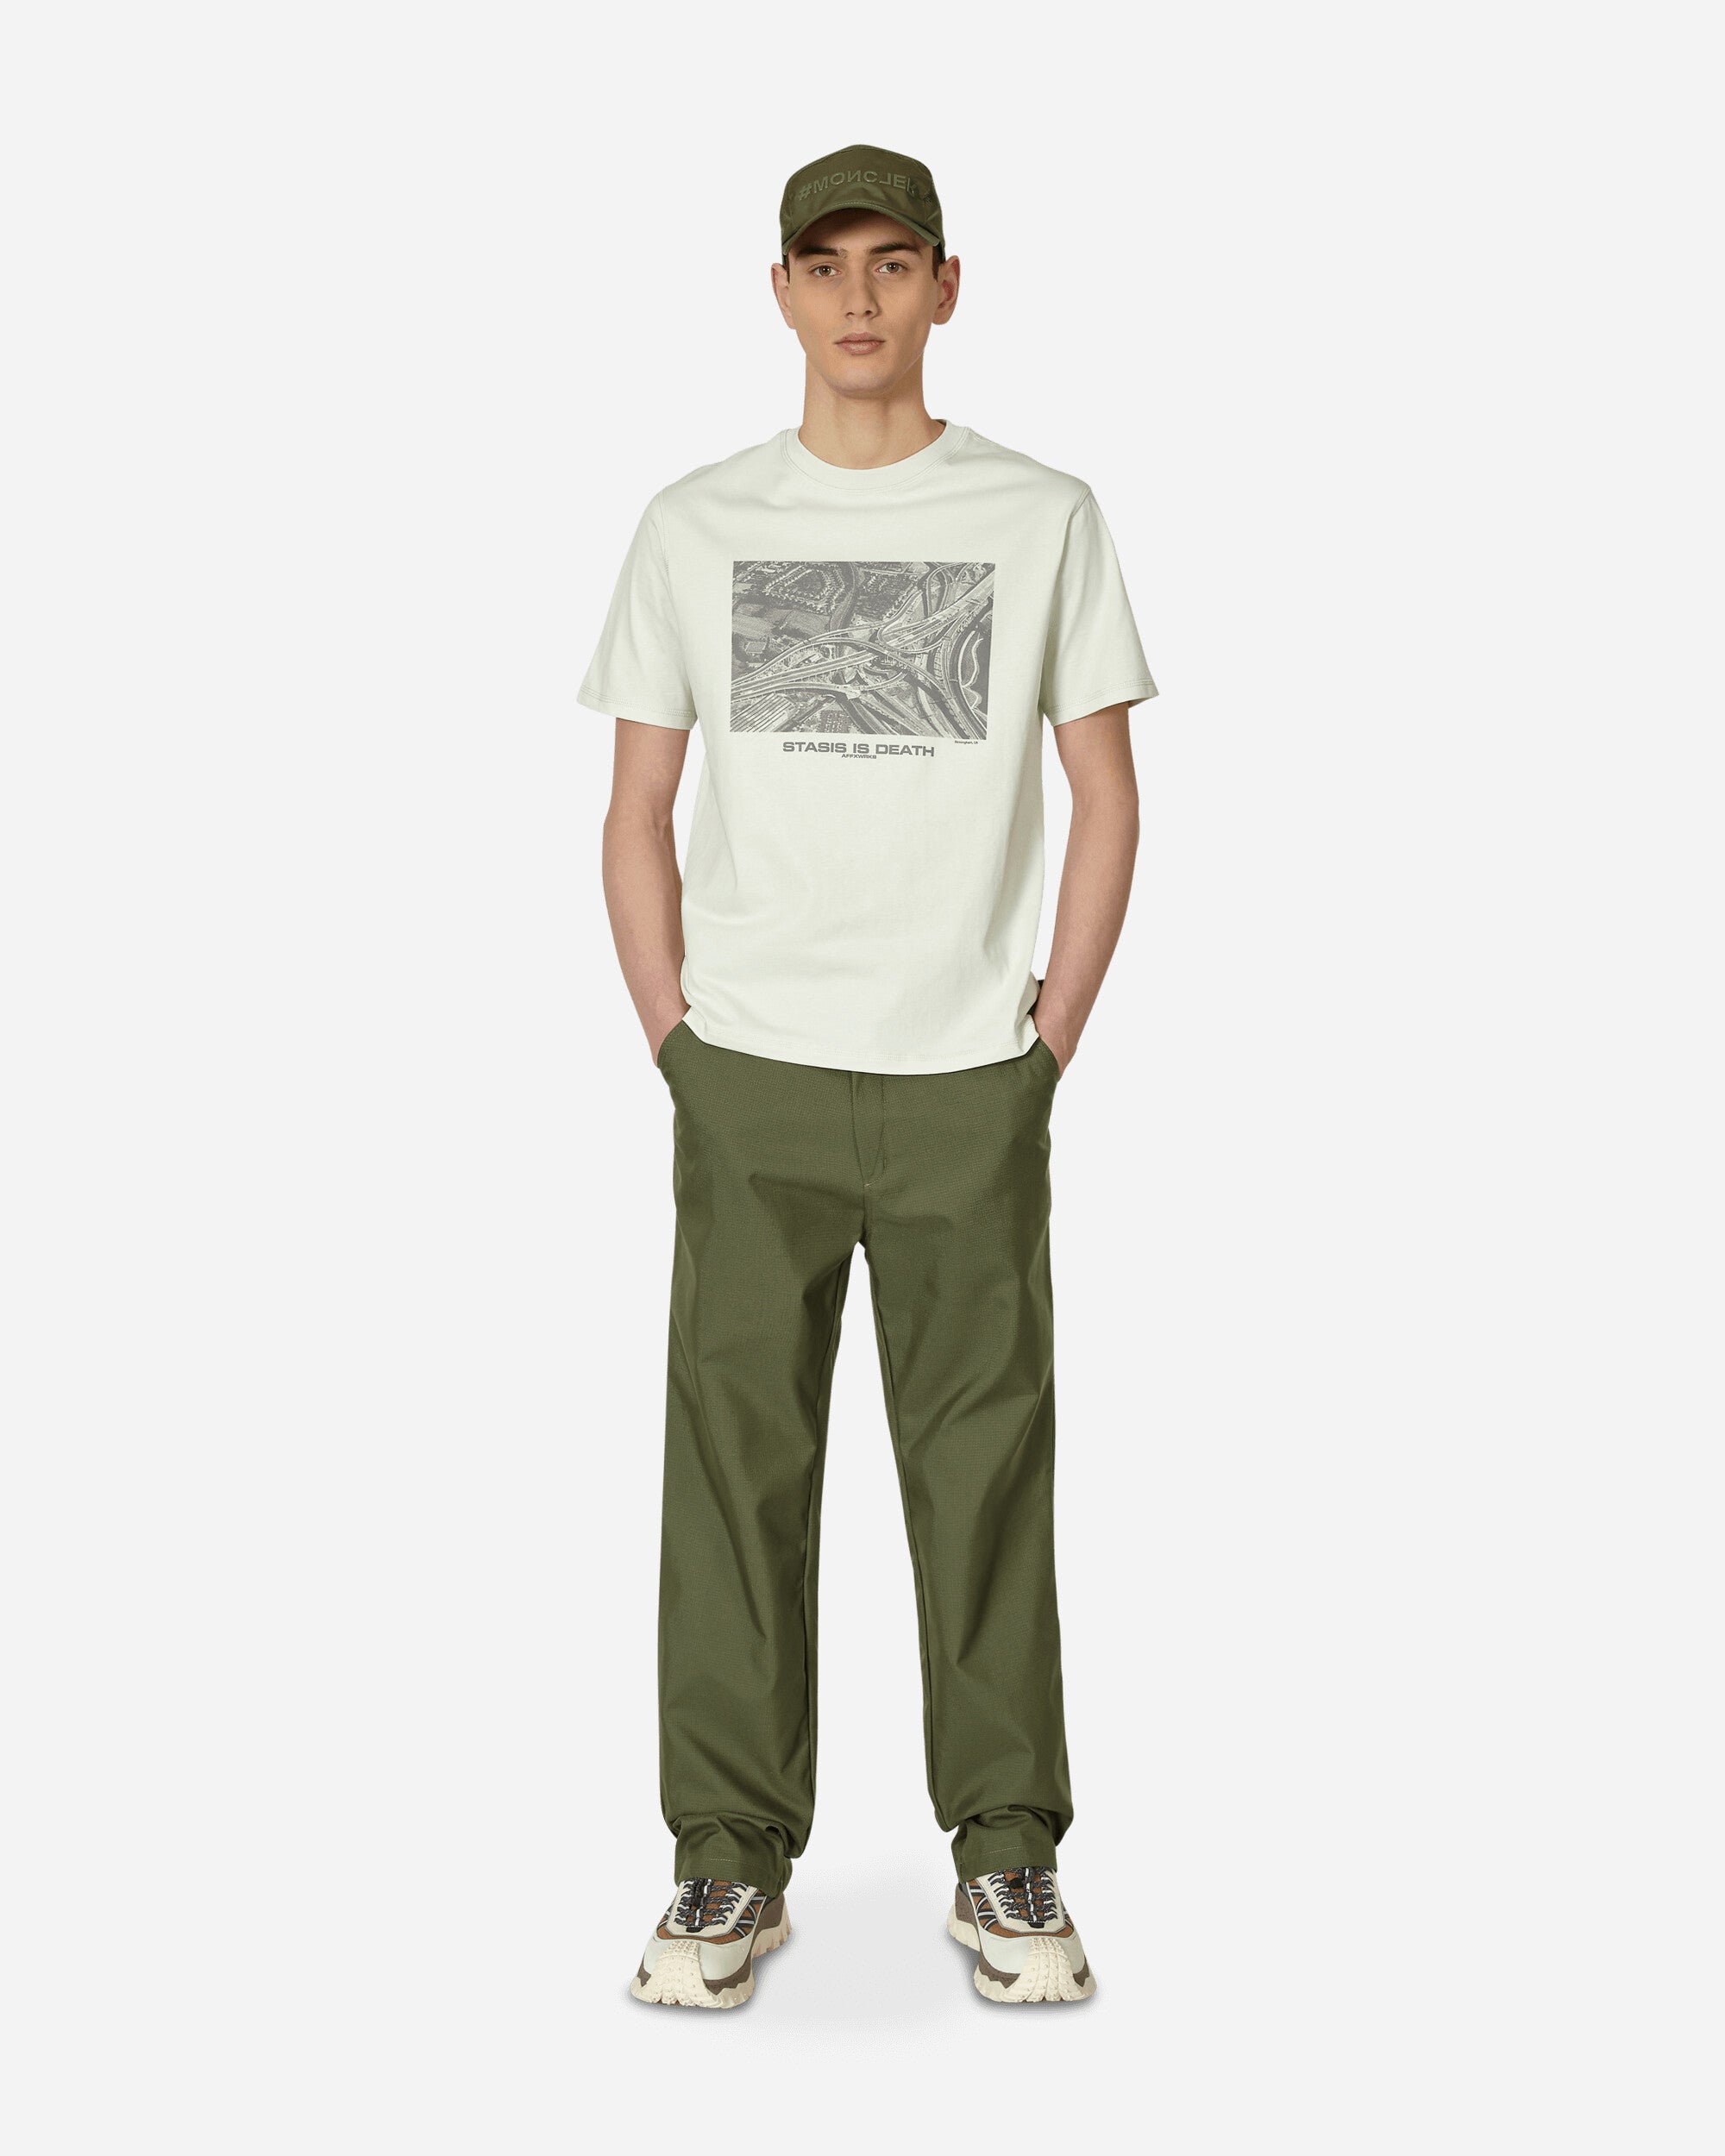 AFFXWRKS Duty Pant Green Ripstop Pants Cargo SS23TR03-1 GREEN